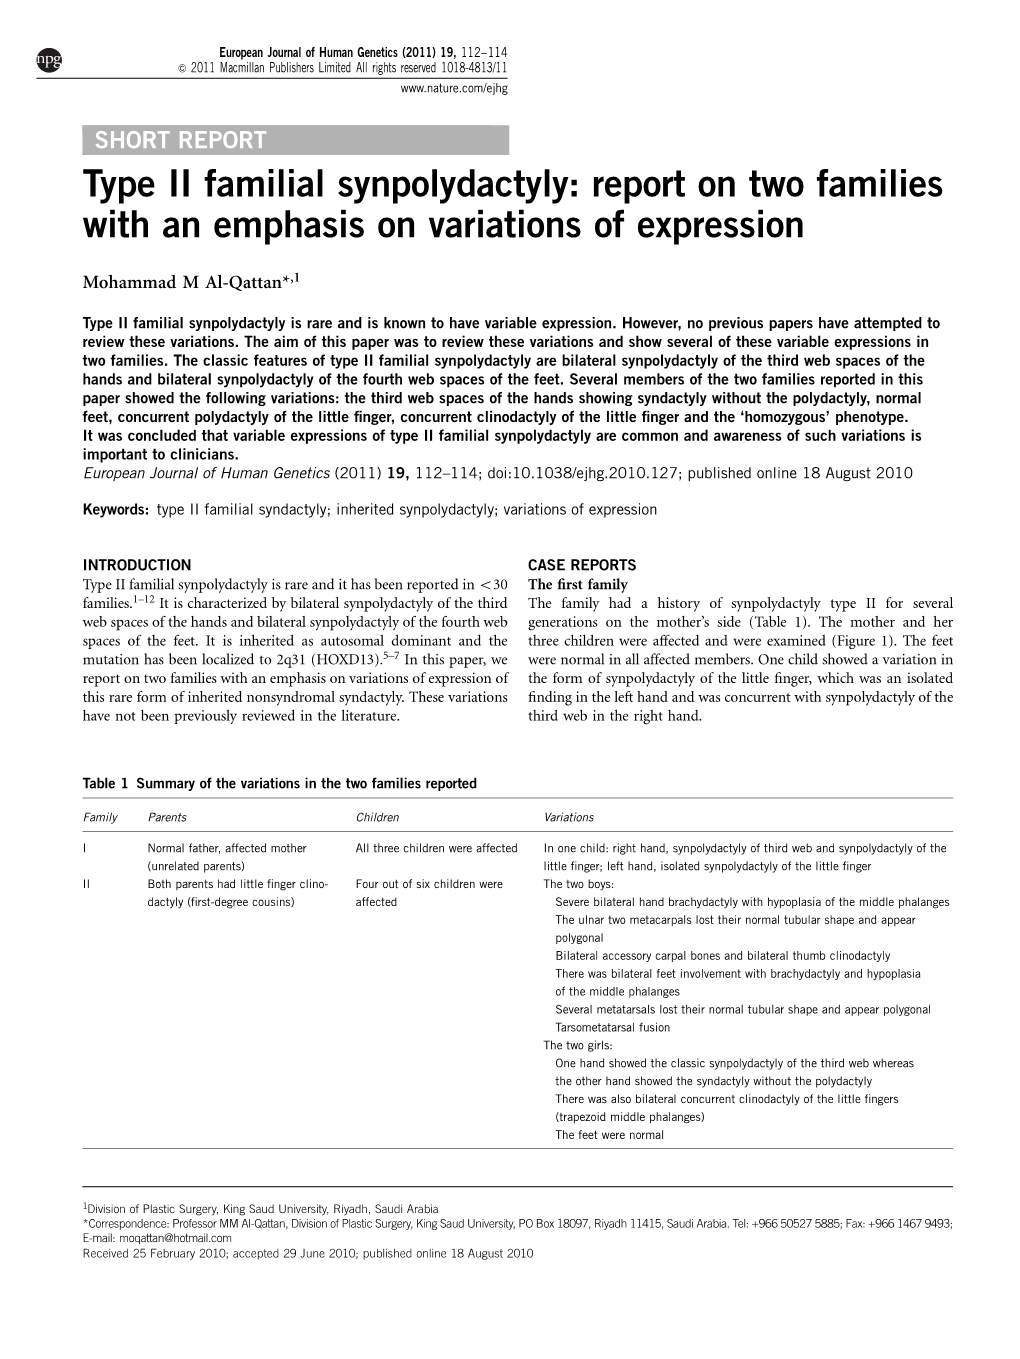 Type II Familial Synpolydactyly: Report on Two Families with an Emphasis on Variations of Expression